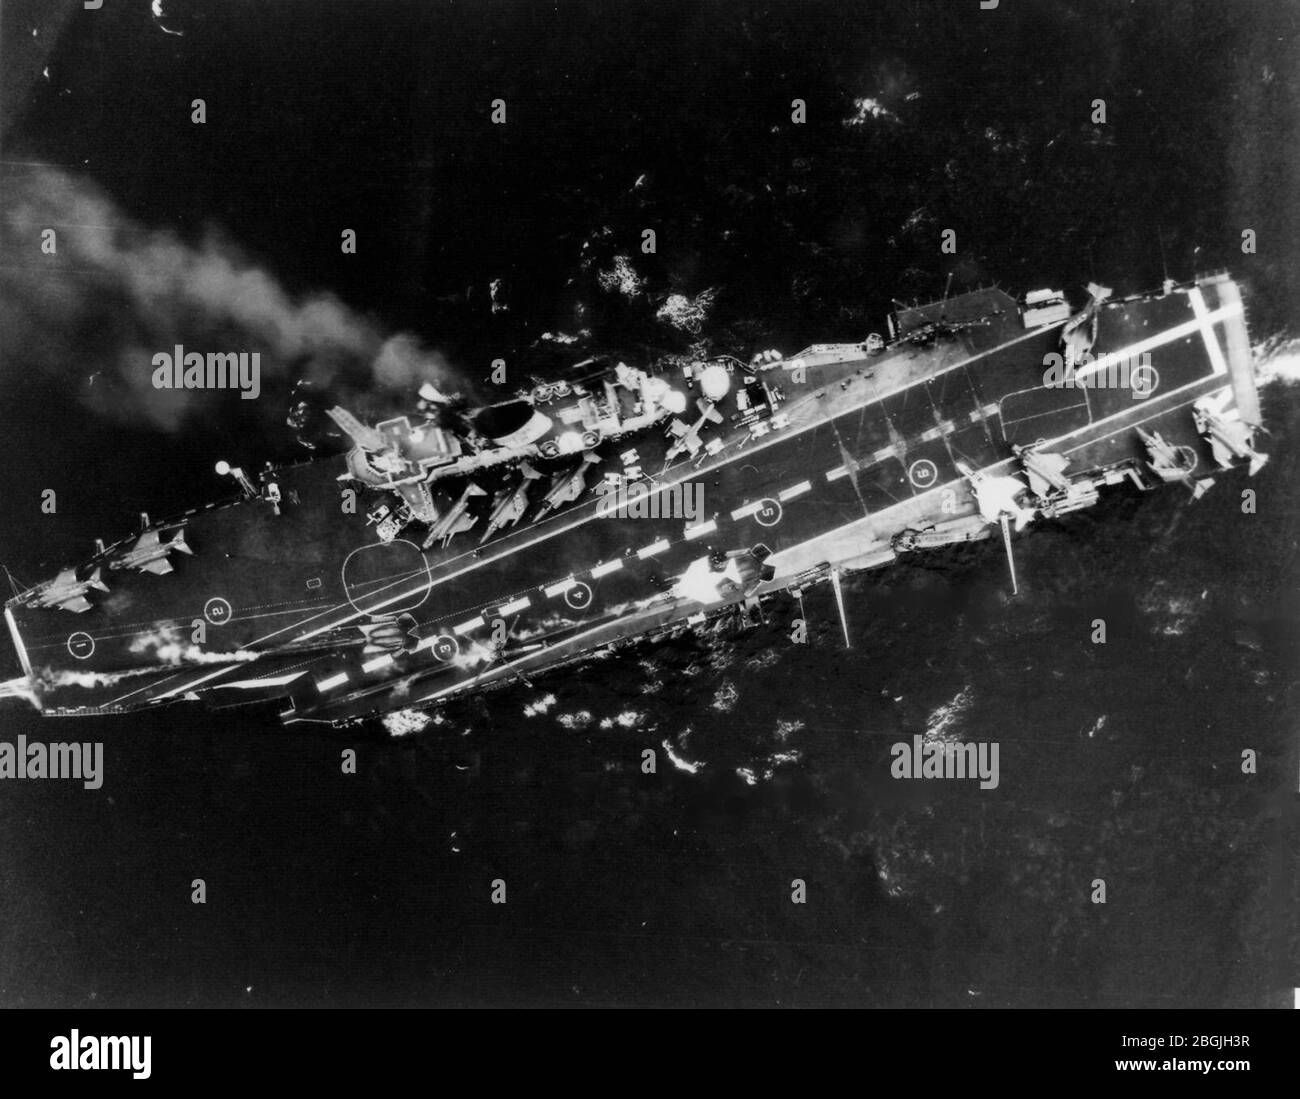 Hms Ark Royal R09 Black and White Stock Photos & Images - Alamy